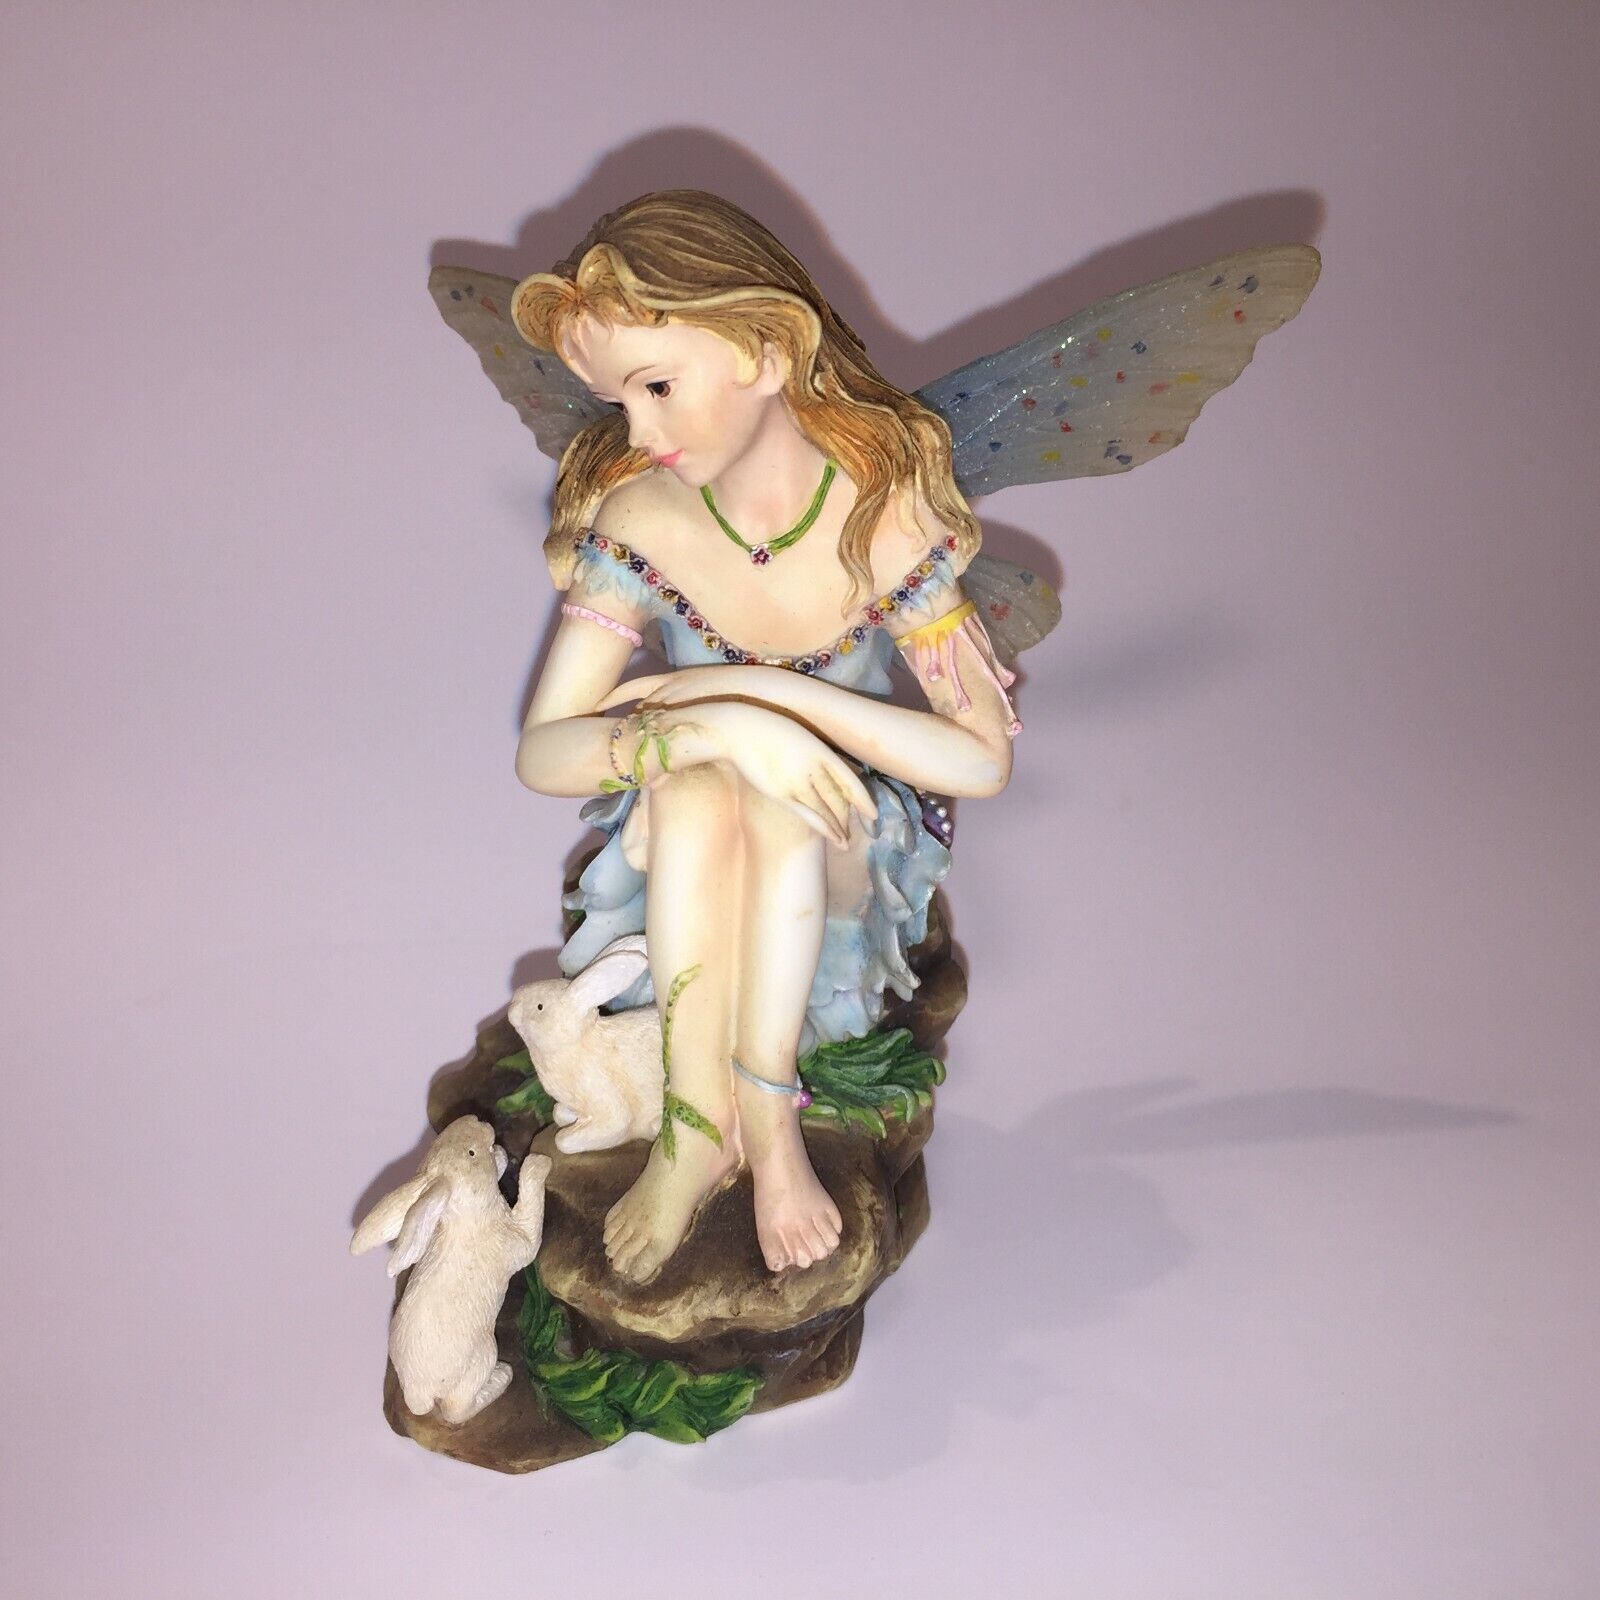 Gorgeous Vintage Genuine (retired) Collectible Handcrafted Fairy Munro Sculpture